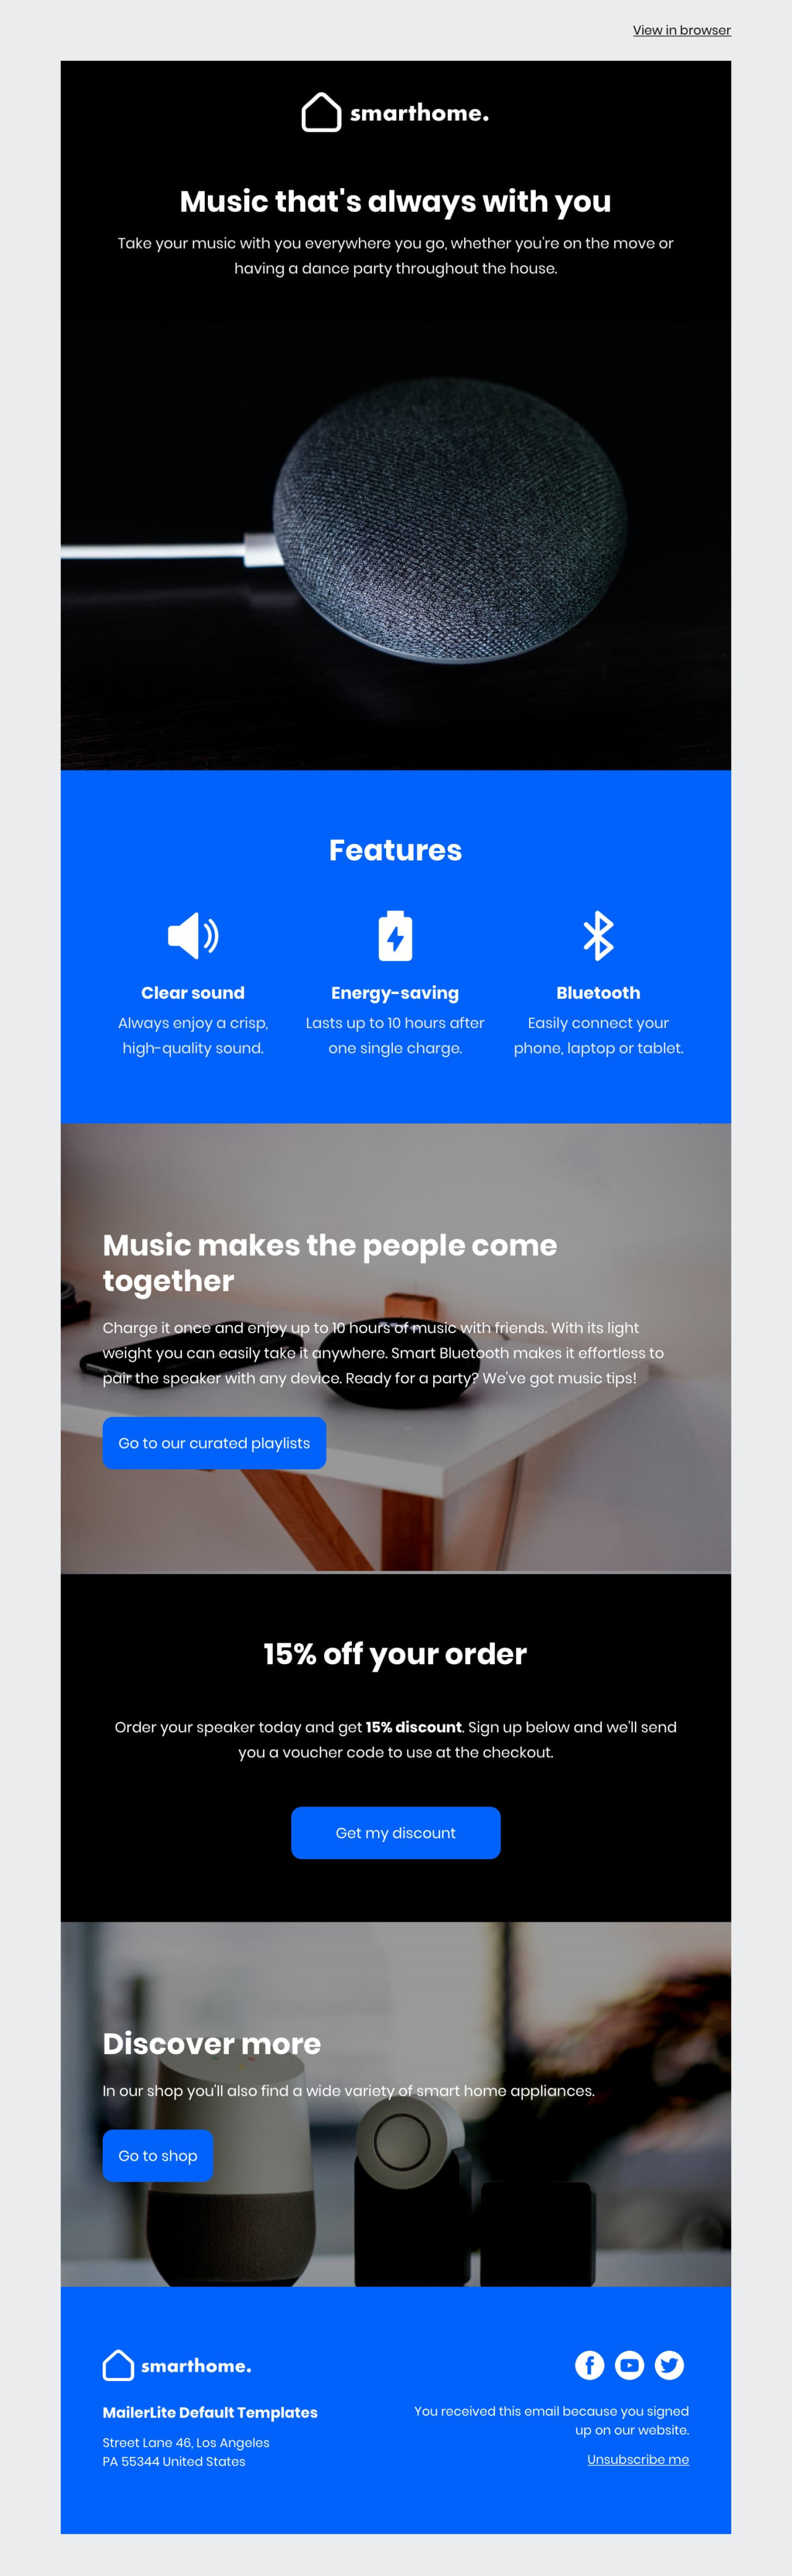 Smart home retail email template template - Made by MailerLite